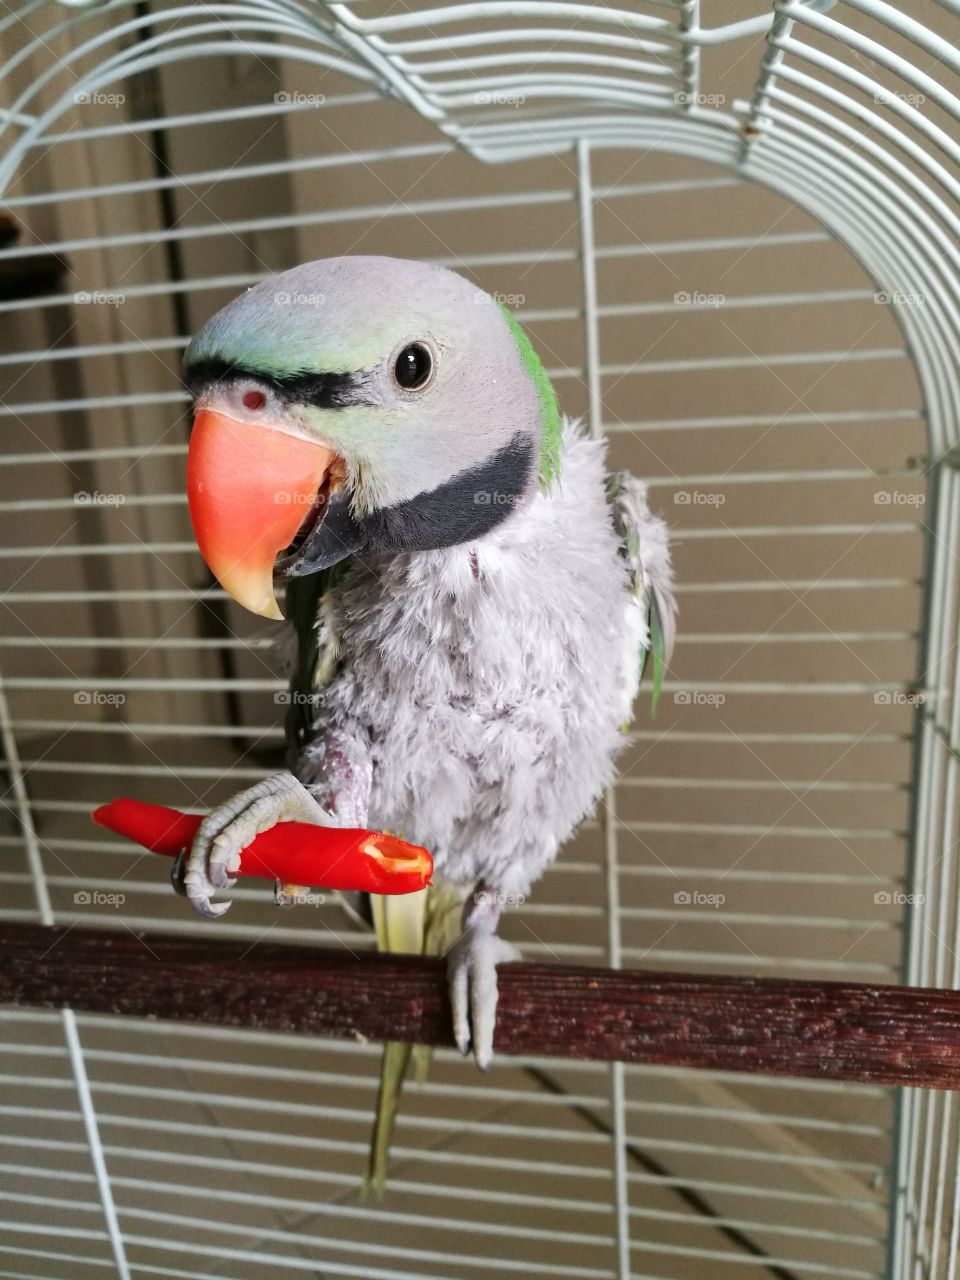 Cute parrot holding red pepper in the cage.